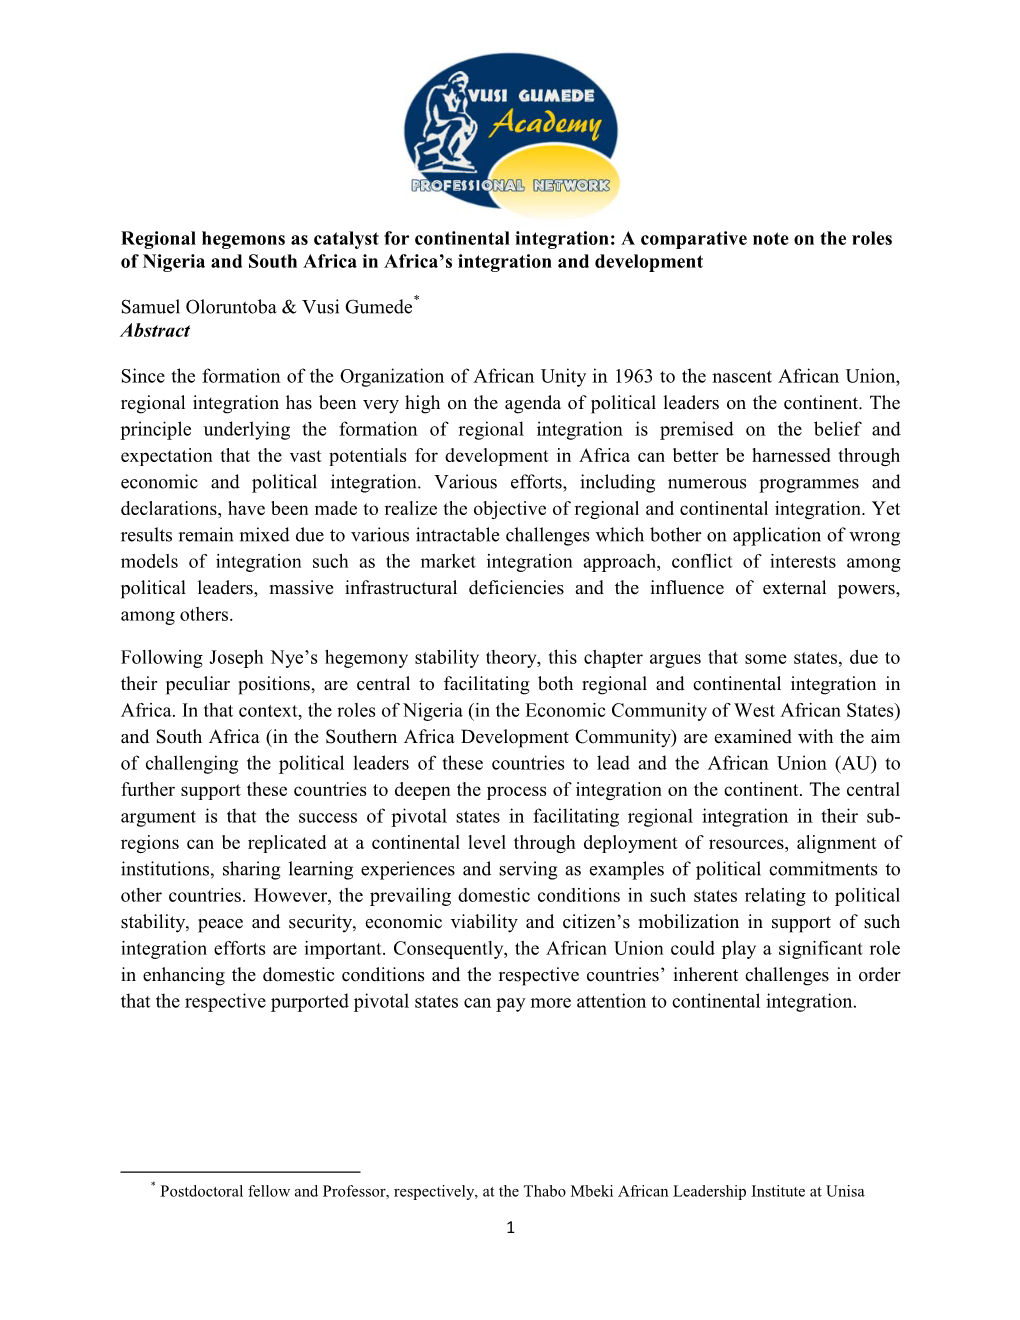 Regional Hegemons As Catalyst for Continental Integration: a Comparative Note on the Roles of Nigeria and South Africa in Africa’S Integration and Development